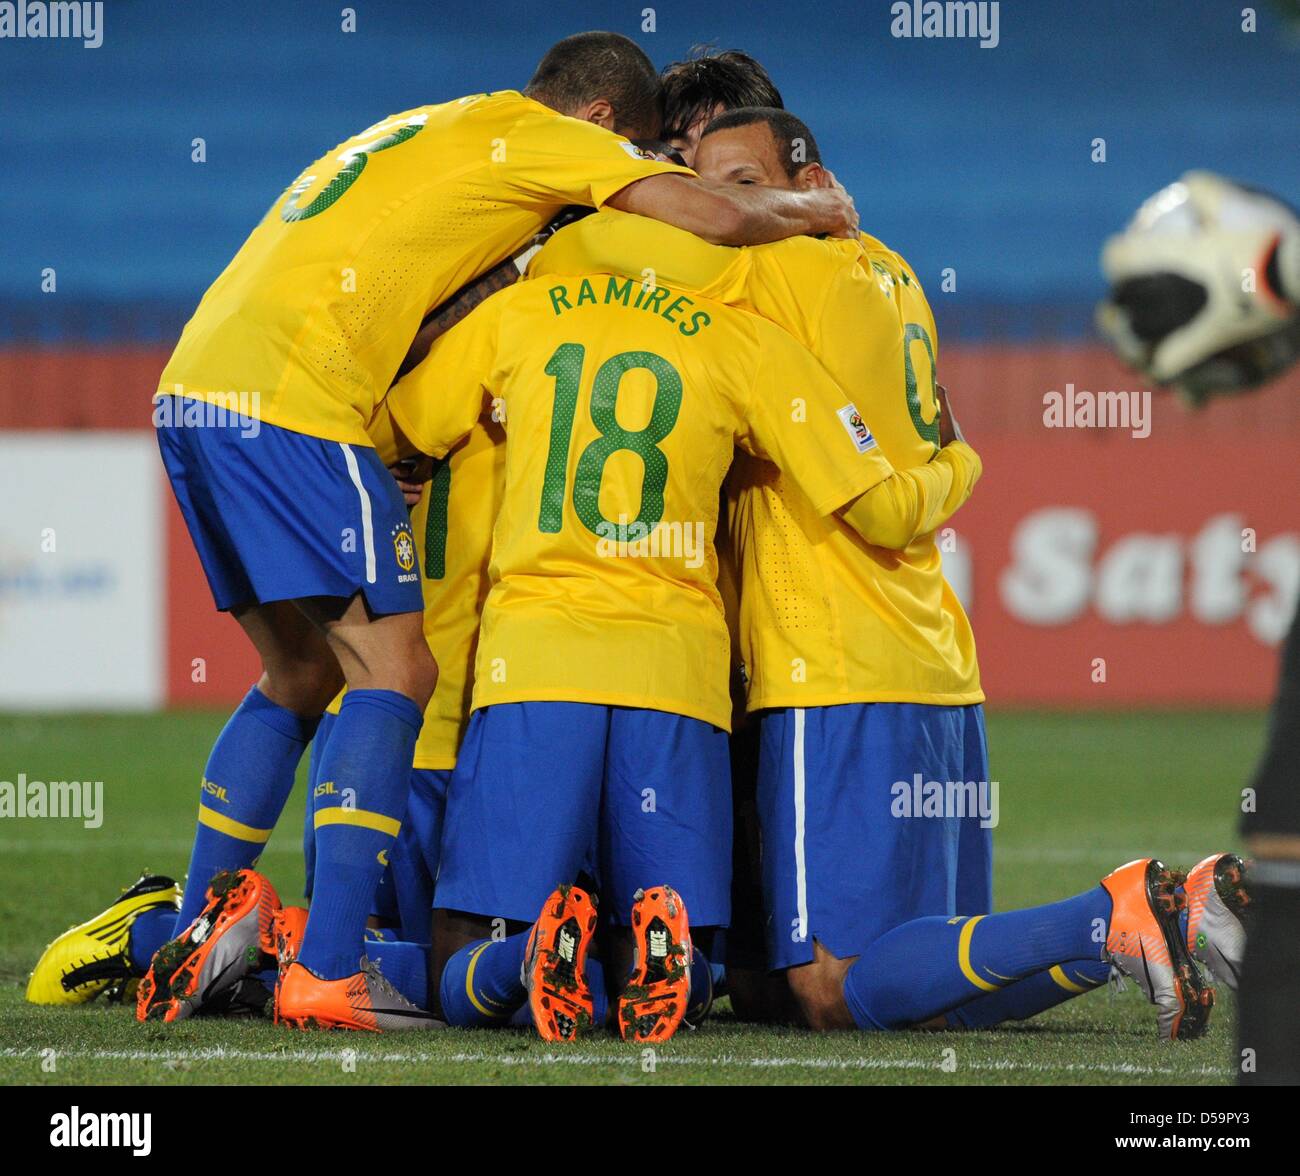 Brazil's Dani Alves (L-R), Ramires and Luis Fabiano celebrate a goal during the 2010 FIFA World Cup Round of Sixteen match between Brazil and Chile at the Ellis Park Stadium in Johannesburg, South Africa 28 June 2010. Photo: Marcus Brandt dpa - Please refer to http://dpaq.de/FIFA-WM2010-TC Stock Photo